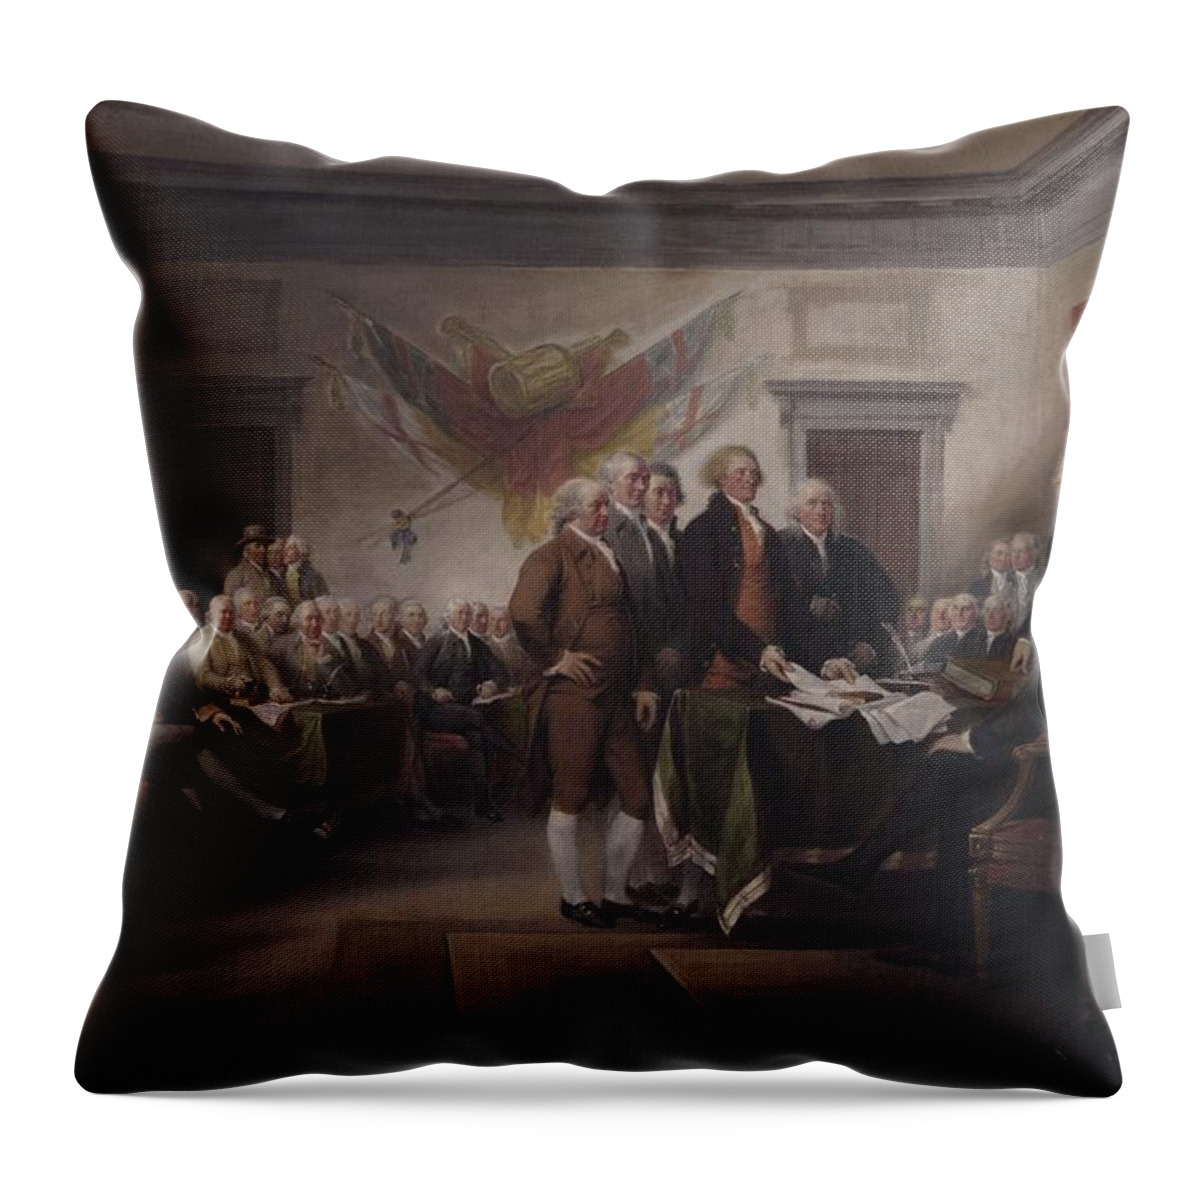 The Declaration Of Independence Throw Pillow featuring the painting The Declaration Of Independence, July 4, 1776 by John Trumbull